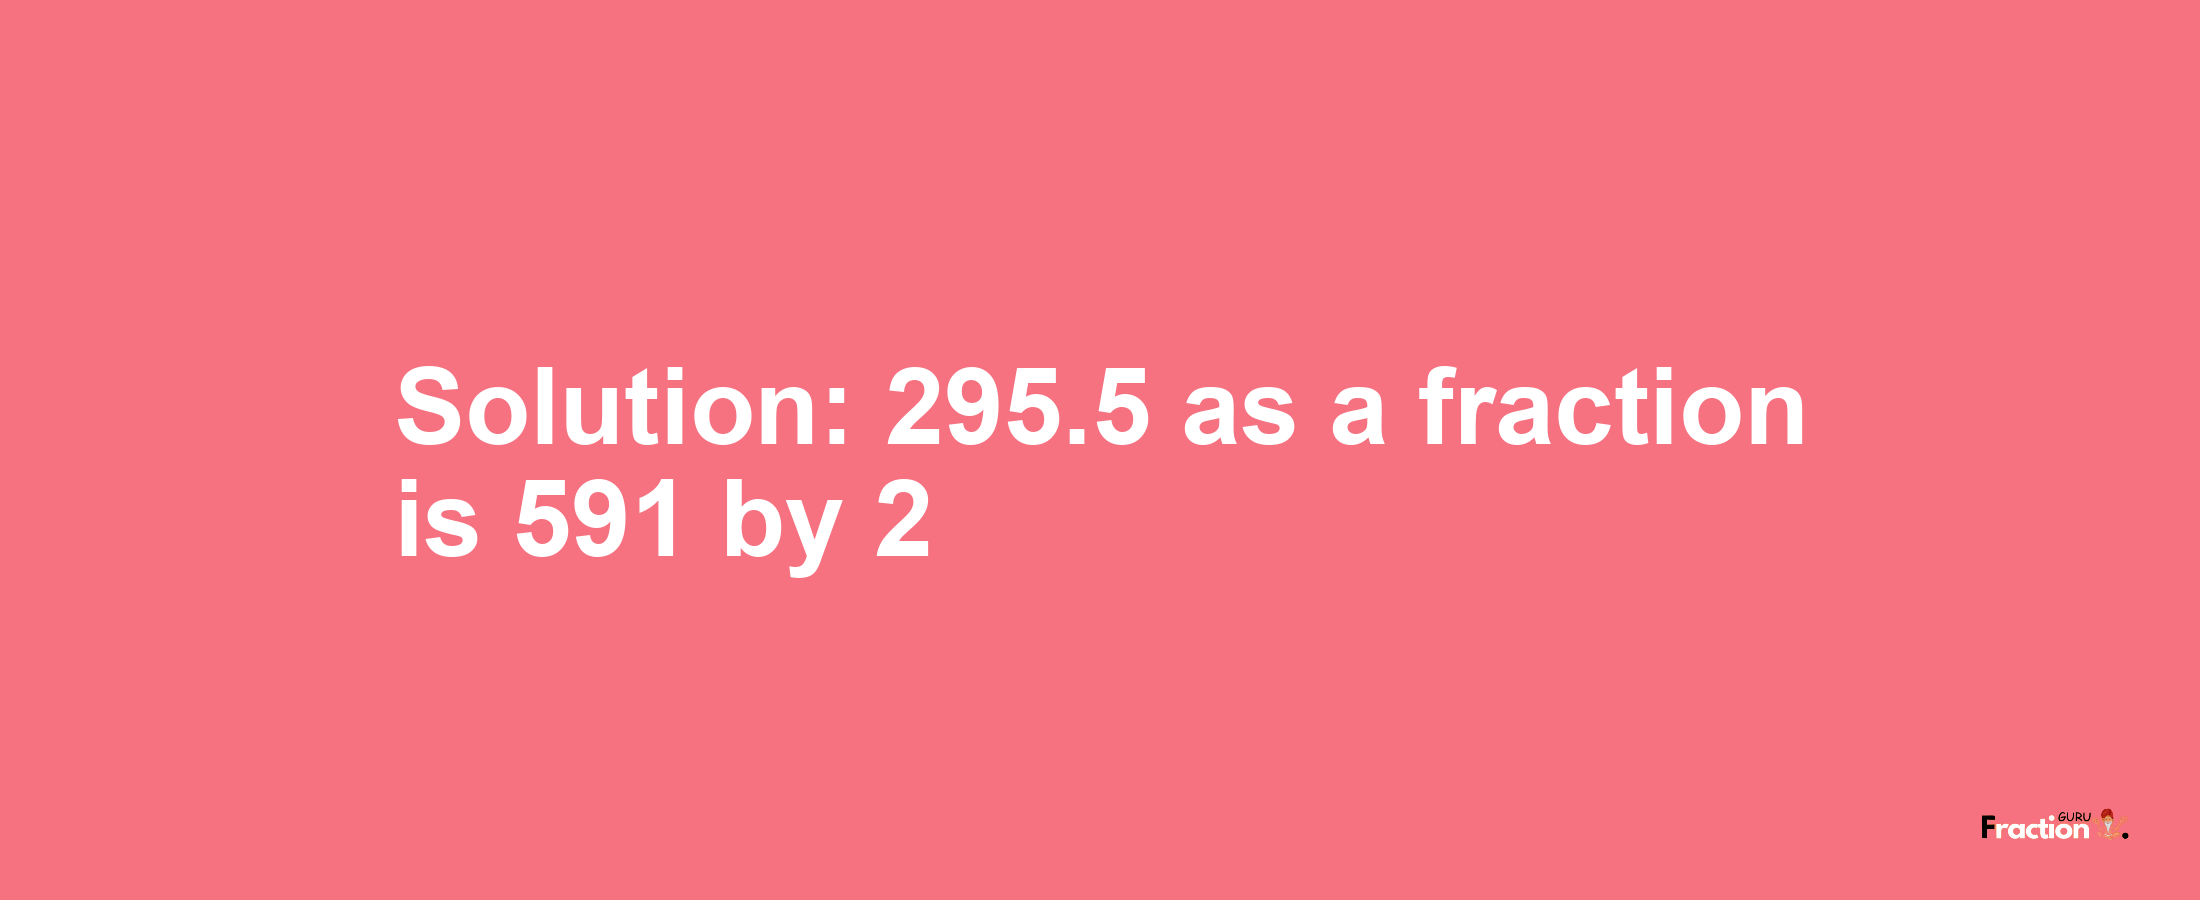 Solution:295.5 as a fraction is 591/2